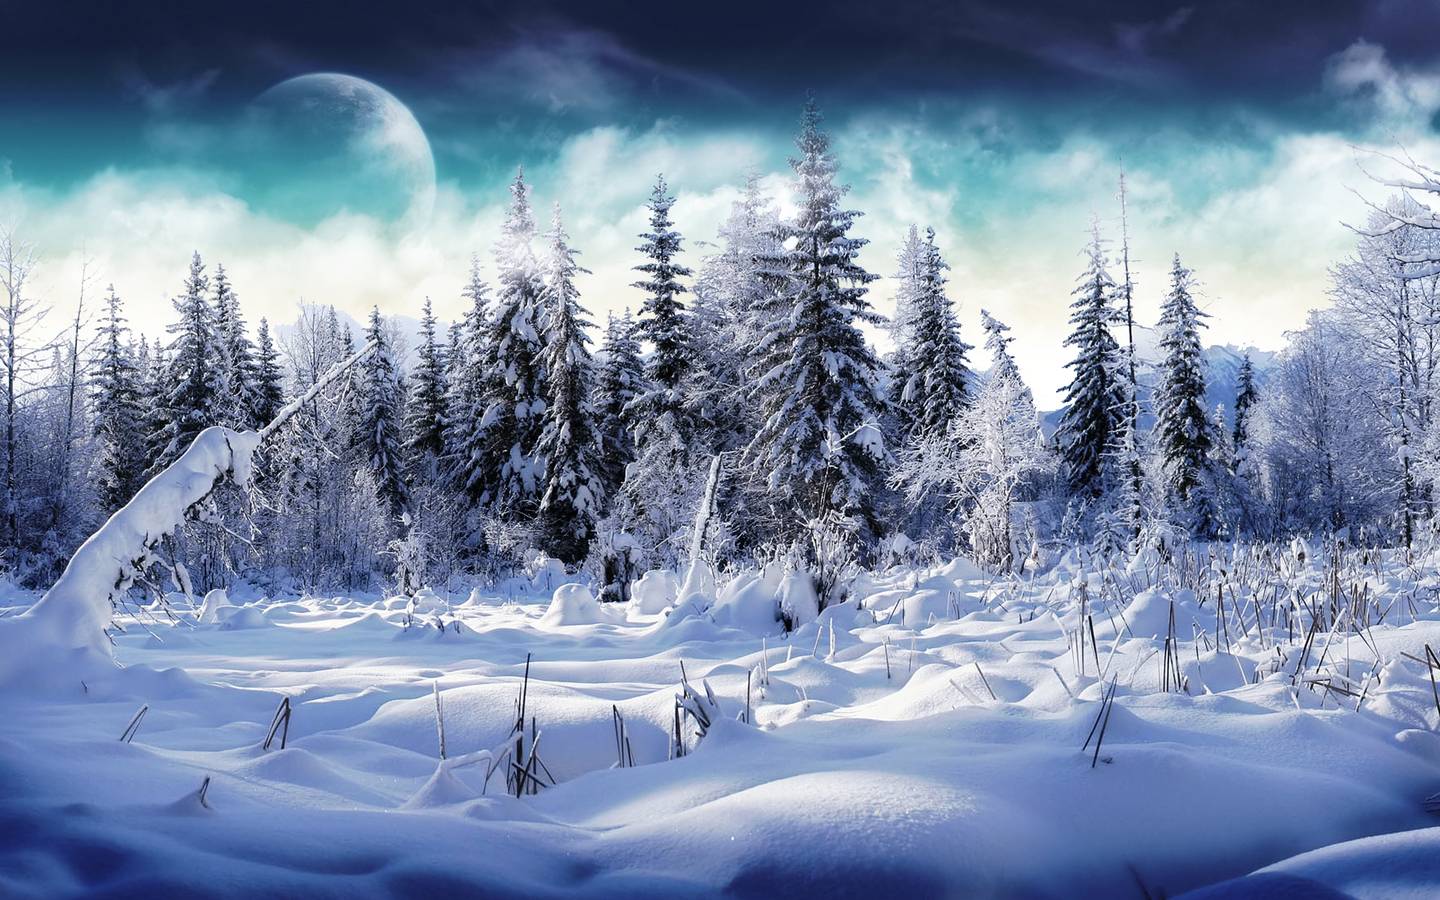 Free Download Winter Scenery PowerPoint Background. PowerPoint E